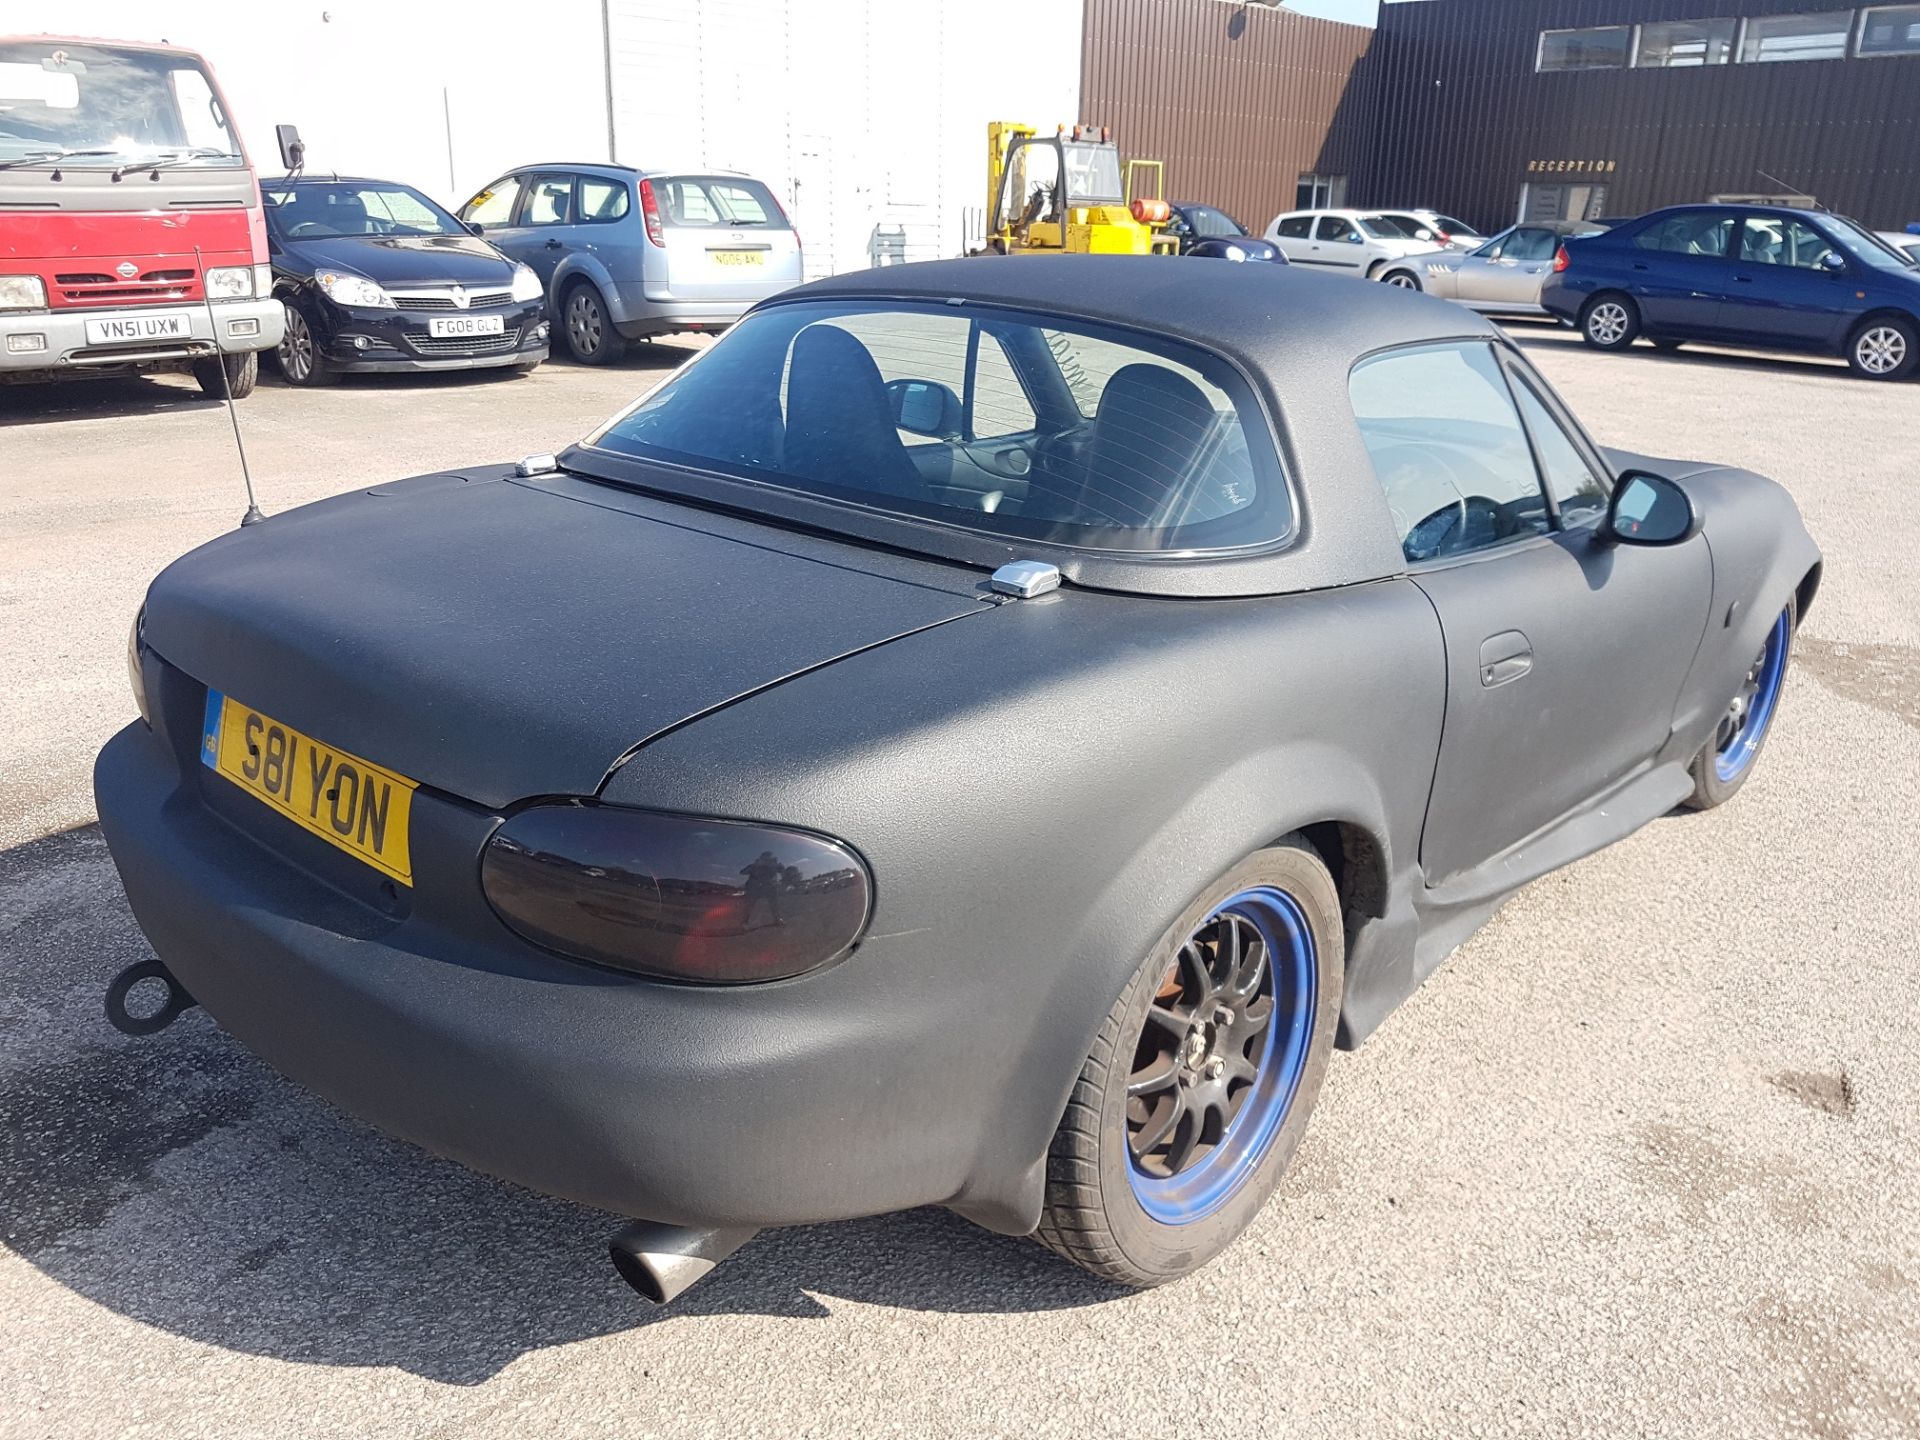 1998 BLACK MAZDA MX-5 SPORT 1265KG, LIGHT AND FAST CAR! HARDTOP FITTED BUT IT IS A CONVERTIBLE - Image 6 of 16